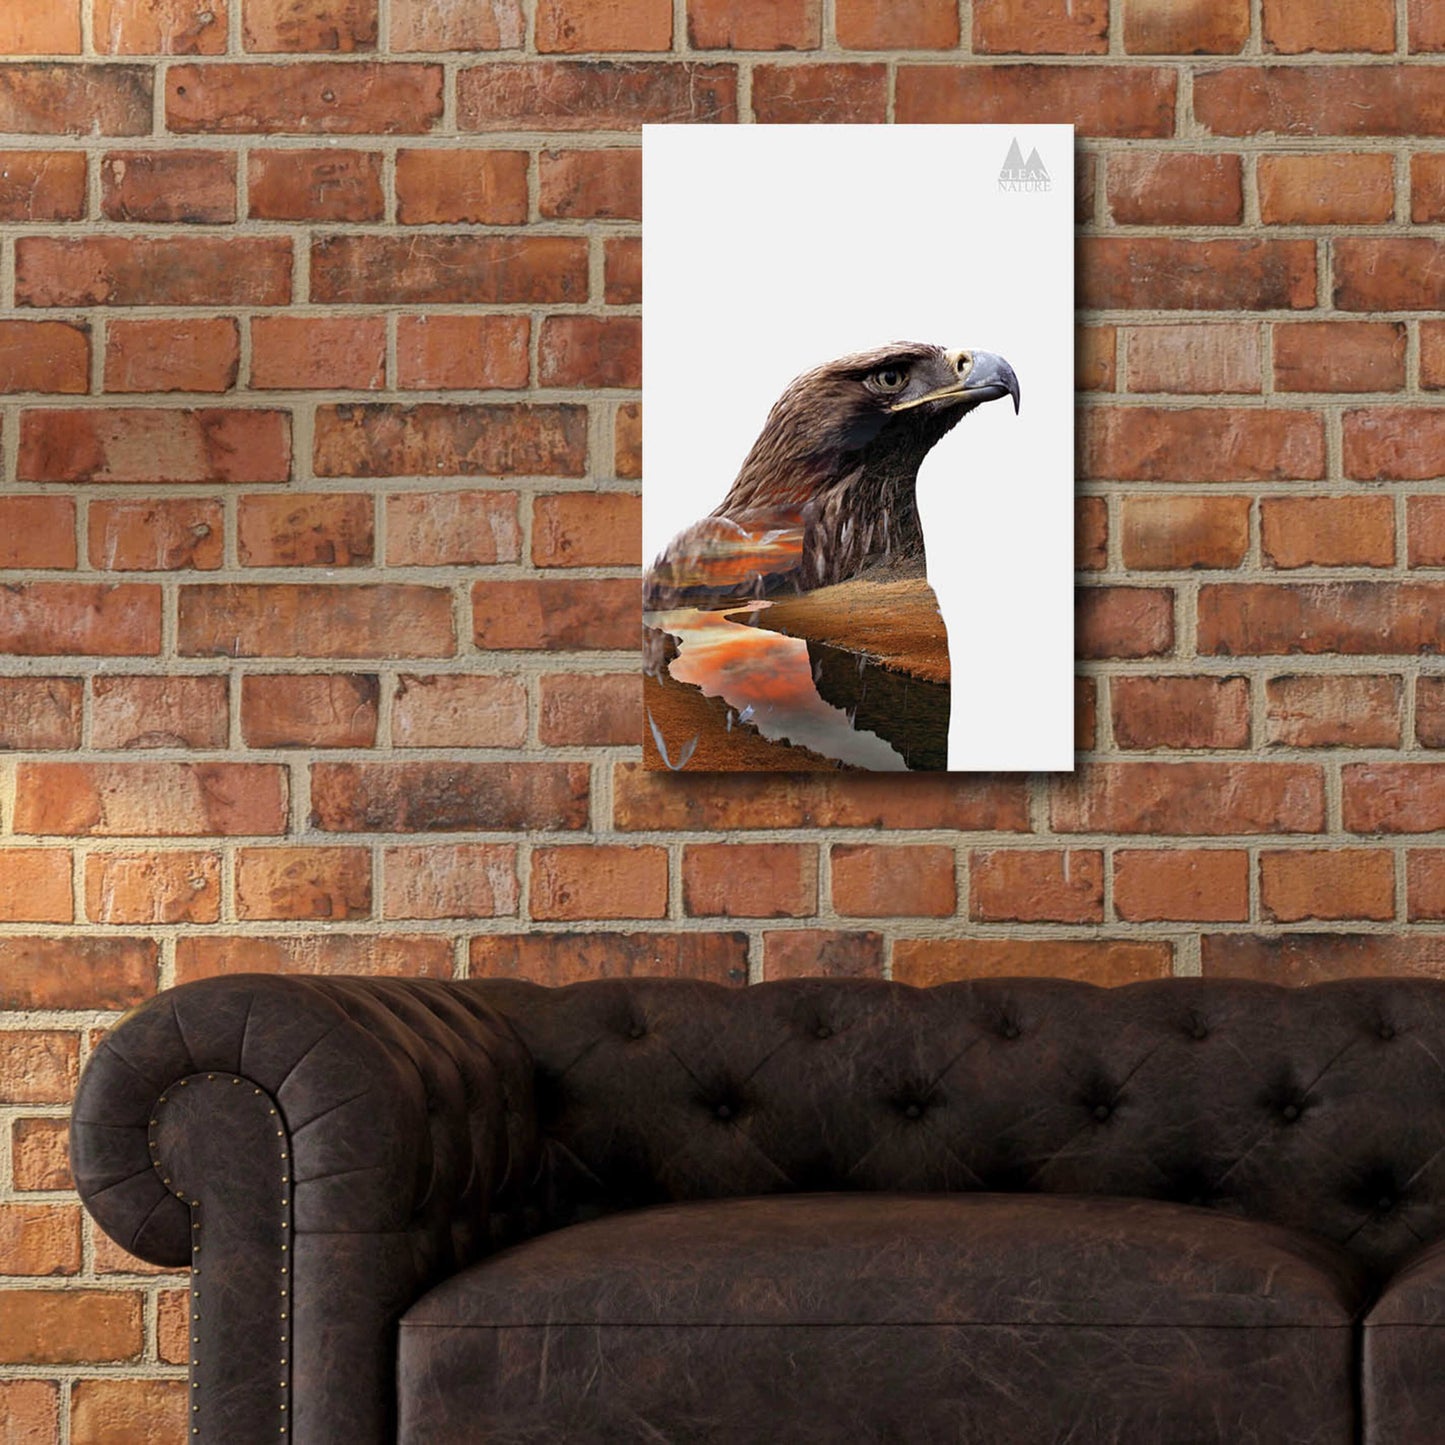 Epic Art 'Eagle' by Clean Nature, Acrylic Glass Wall Art,16x24